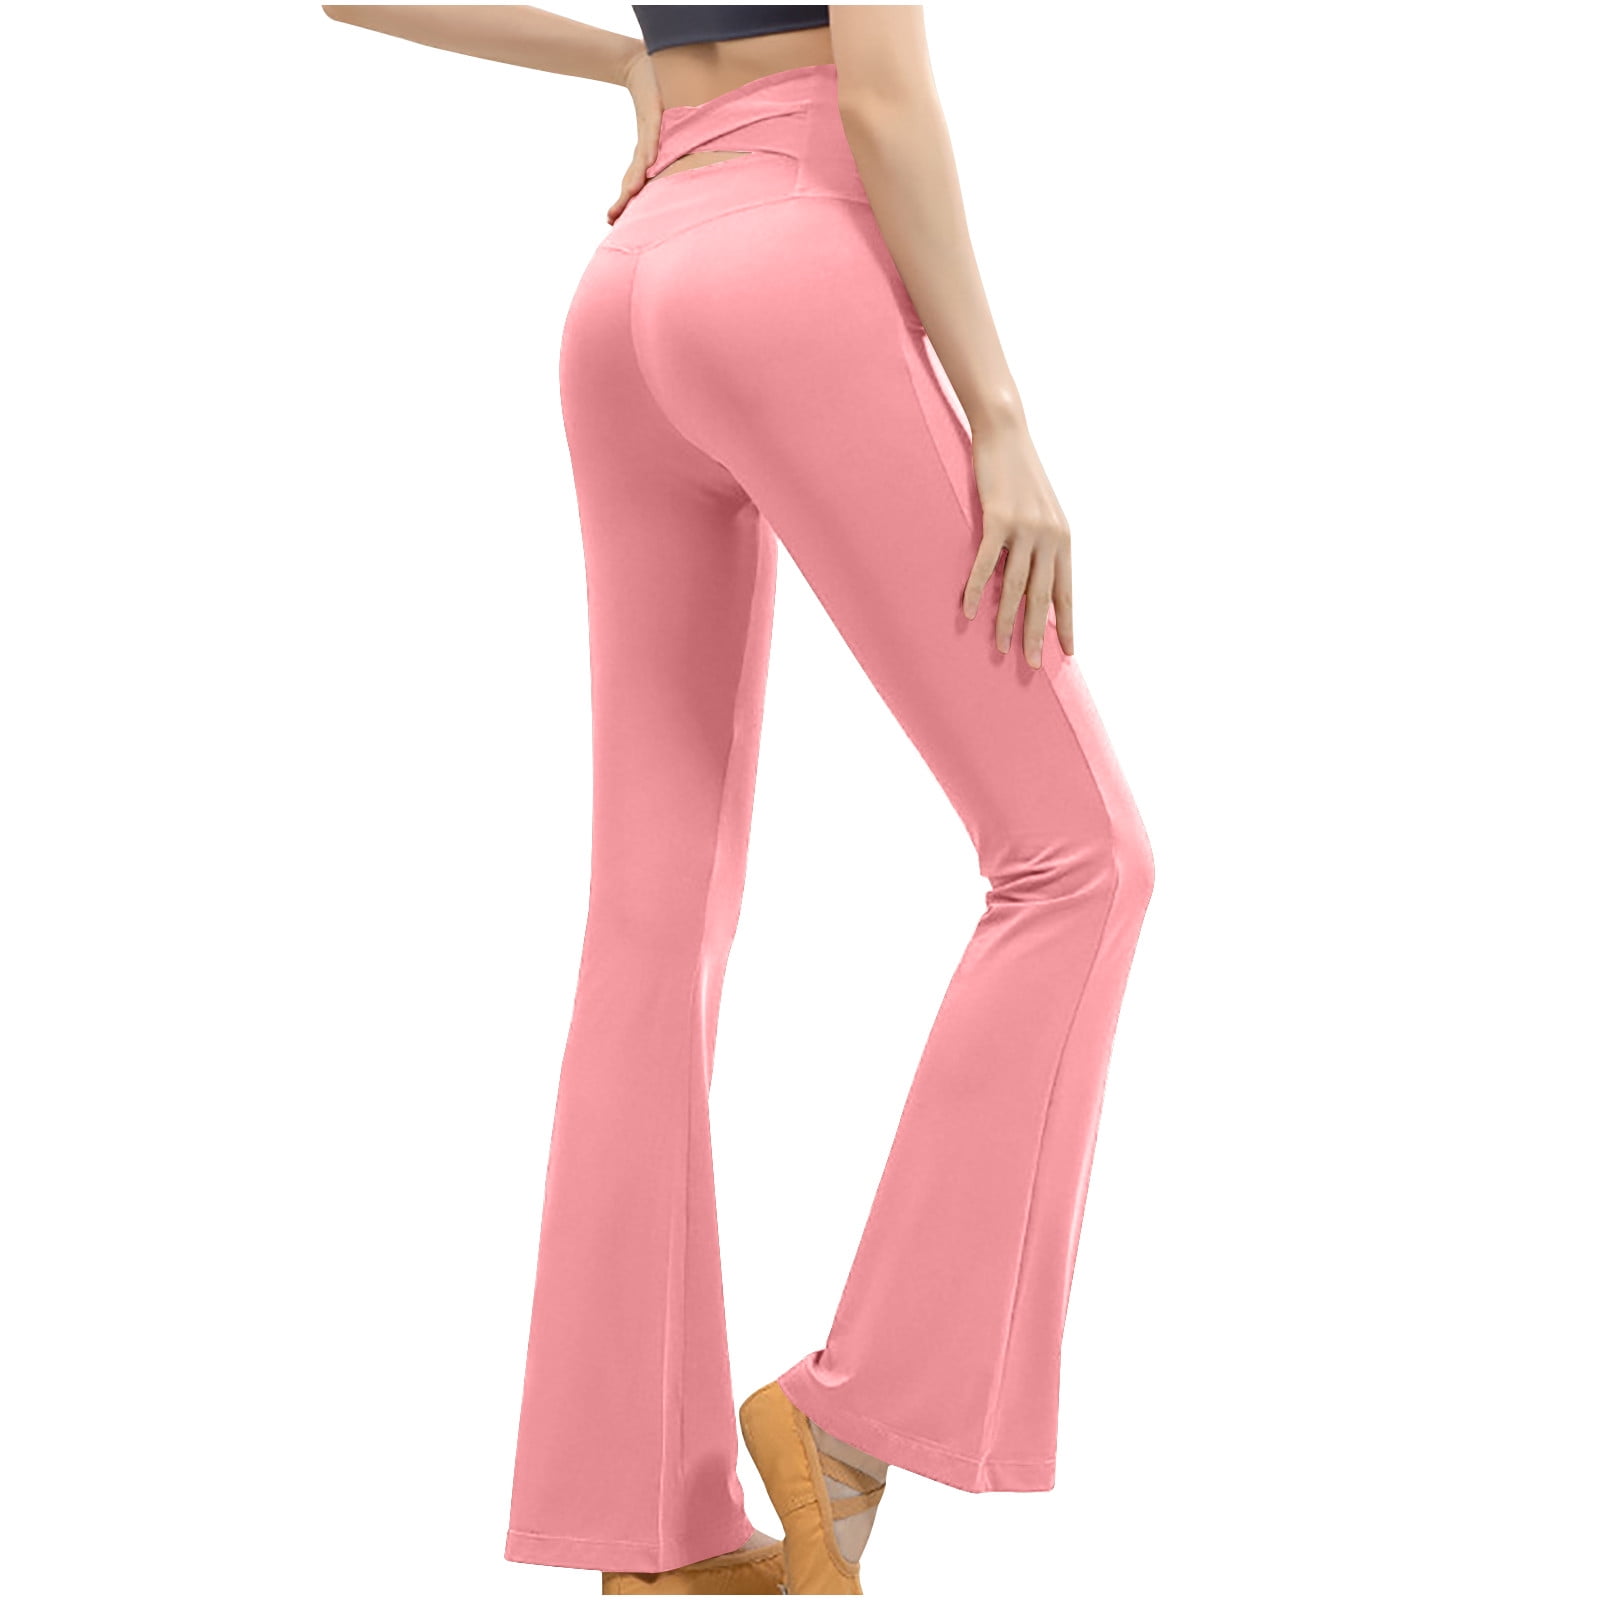 Reduce Price Hfyihgf Women's Bootcut Yoga Pants-Flare Leggings for Women  High Waisted Crossover V-Back Workout Lounge Bell Bottom Jazz Dress Pants(Pink,XXL)  